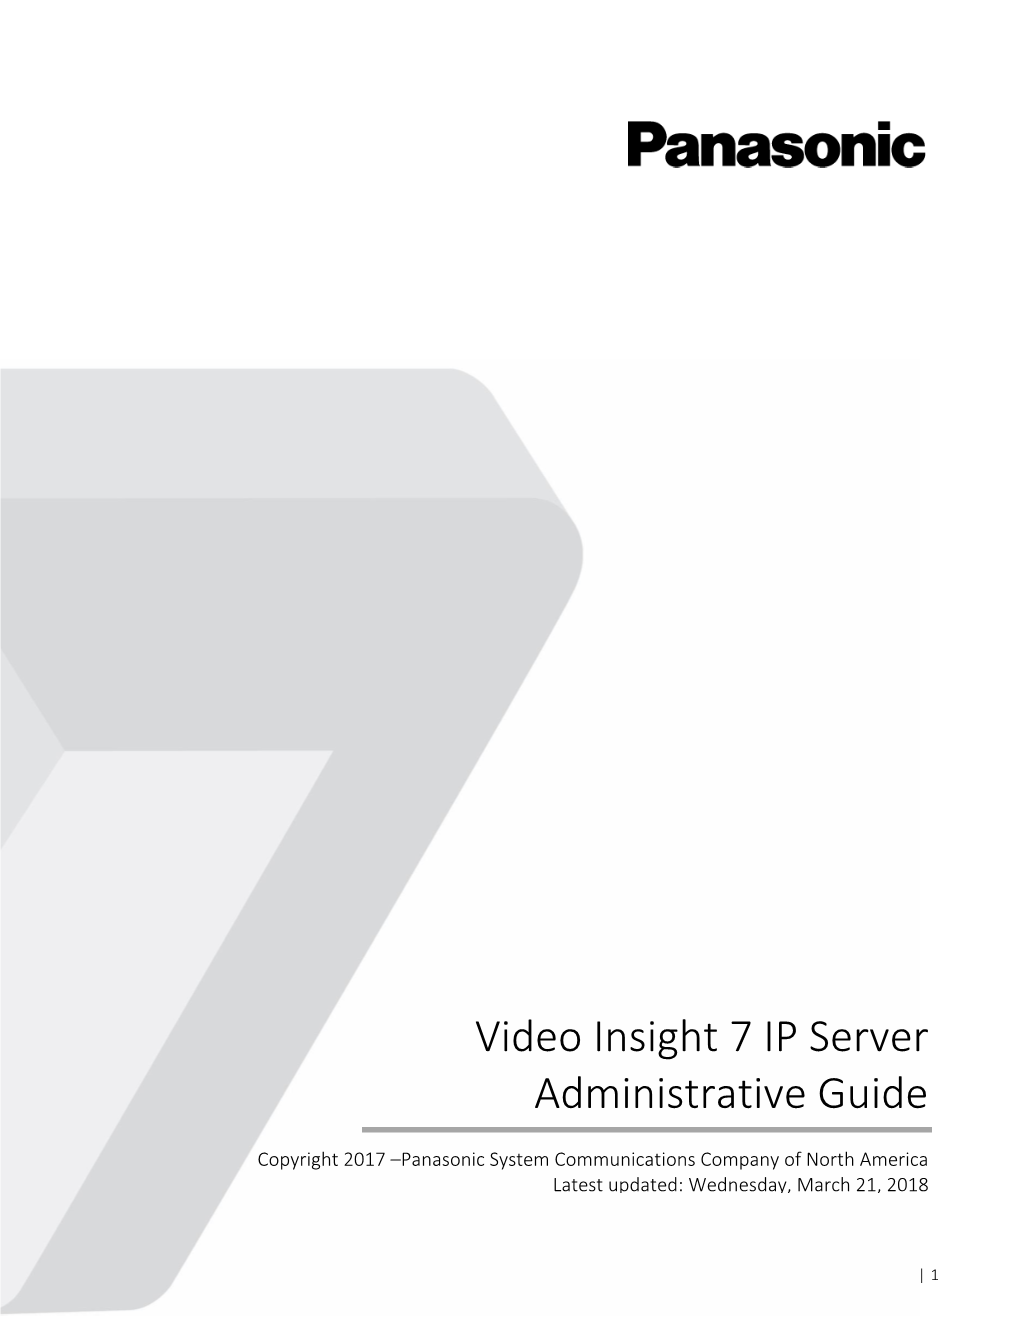 Video Insight 7 IP Server Administrative Guide